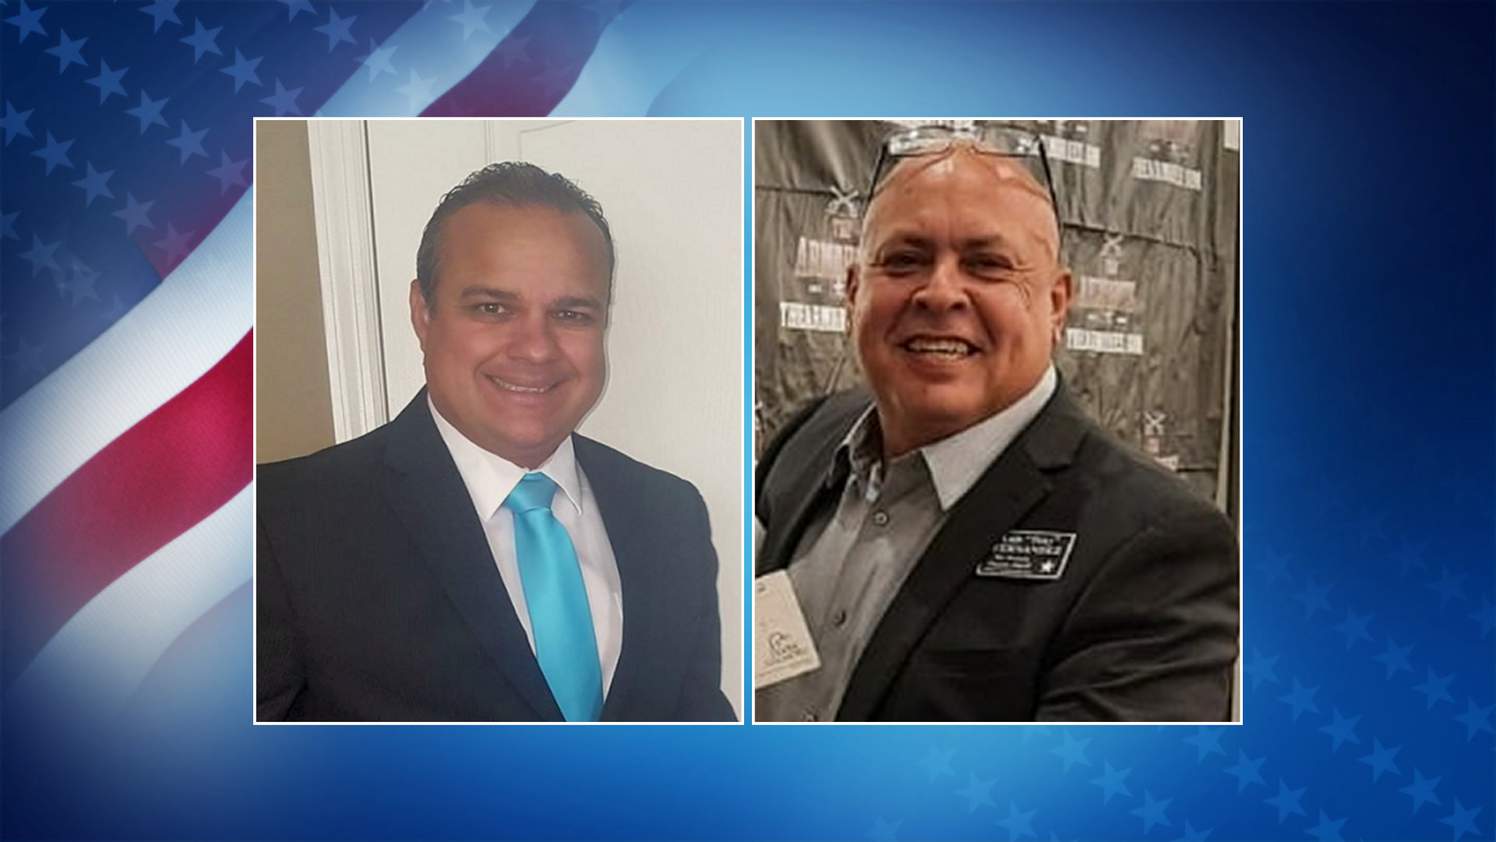 Meet the candidates: Here’s who’s running for Osceola County sheriff